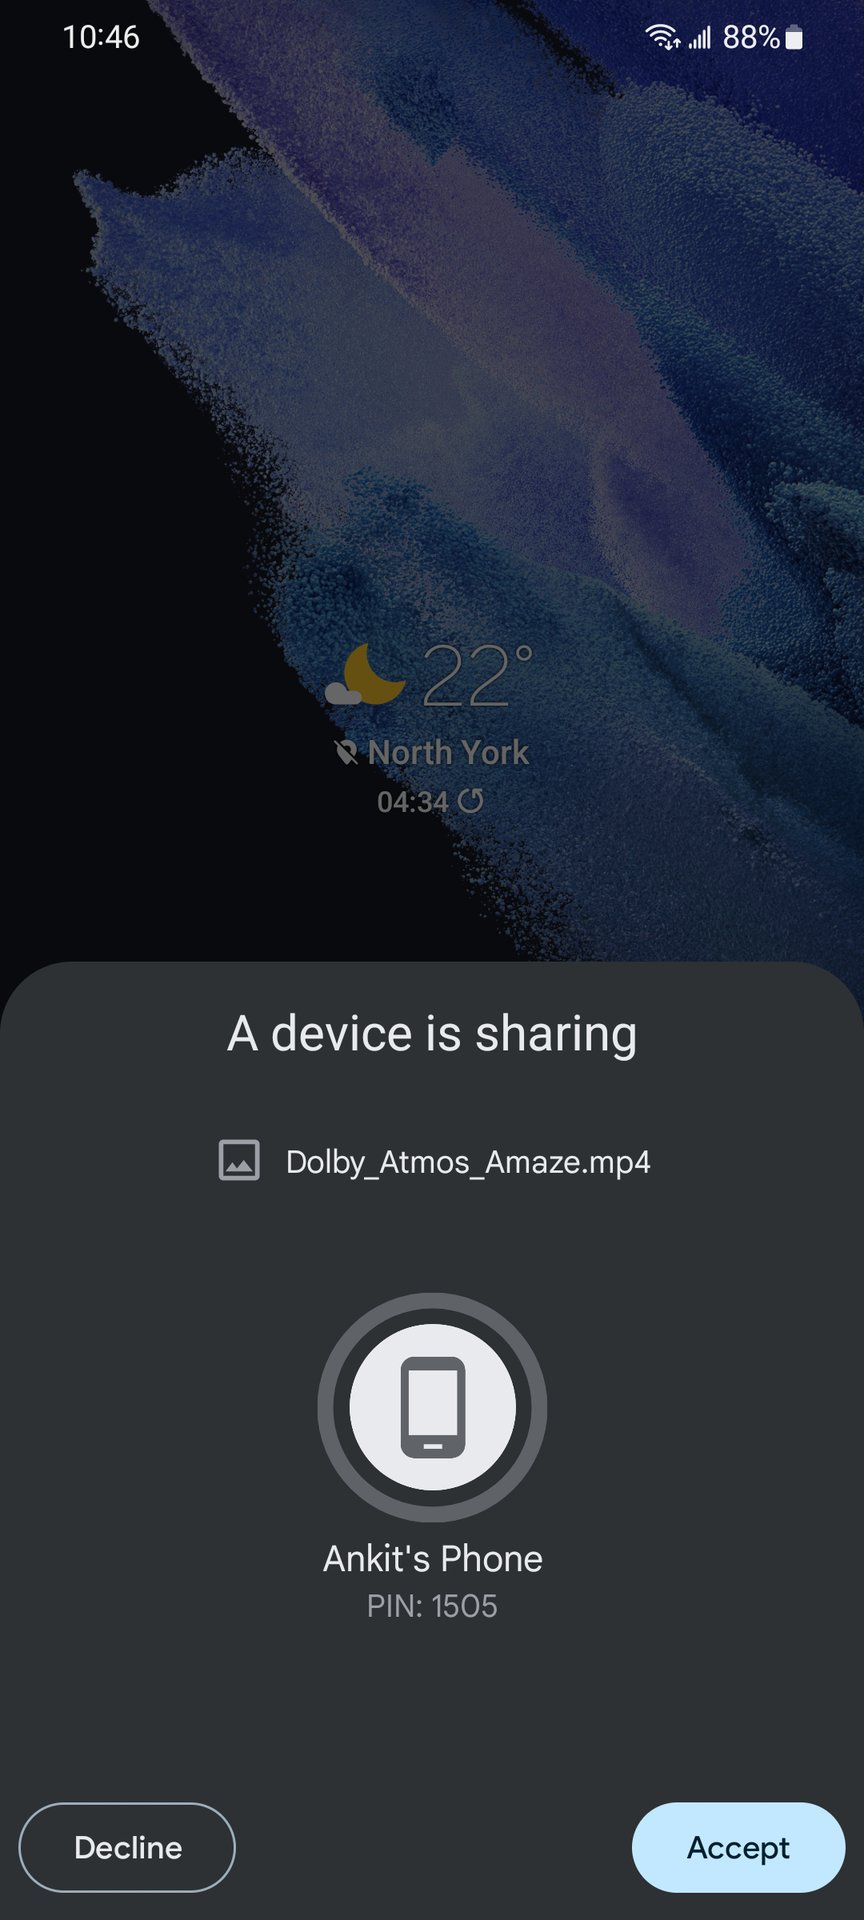 nearby share receiving request on second device